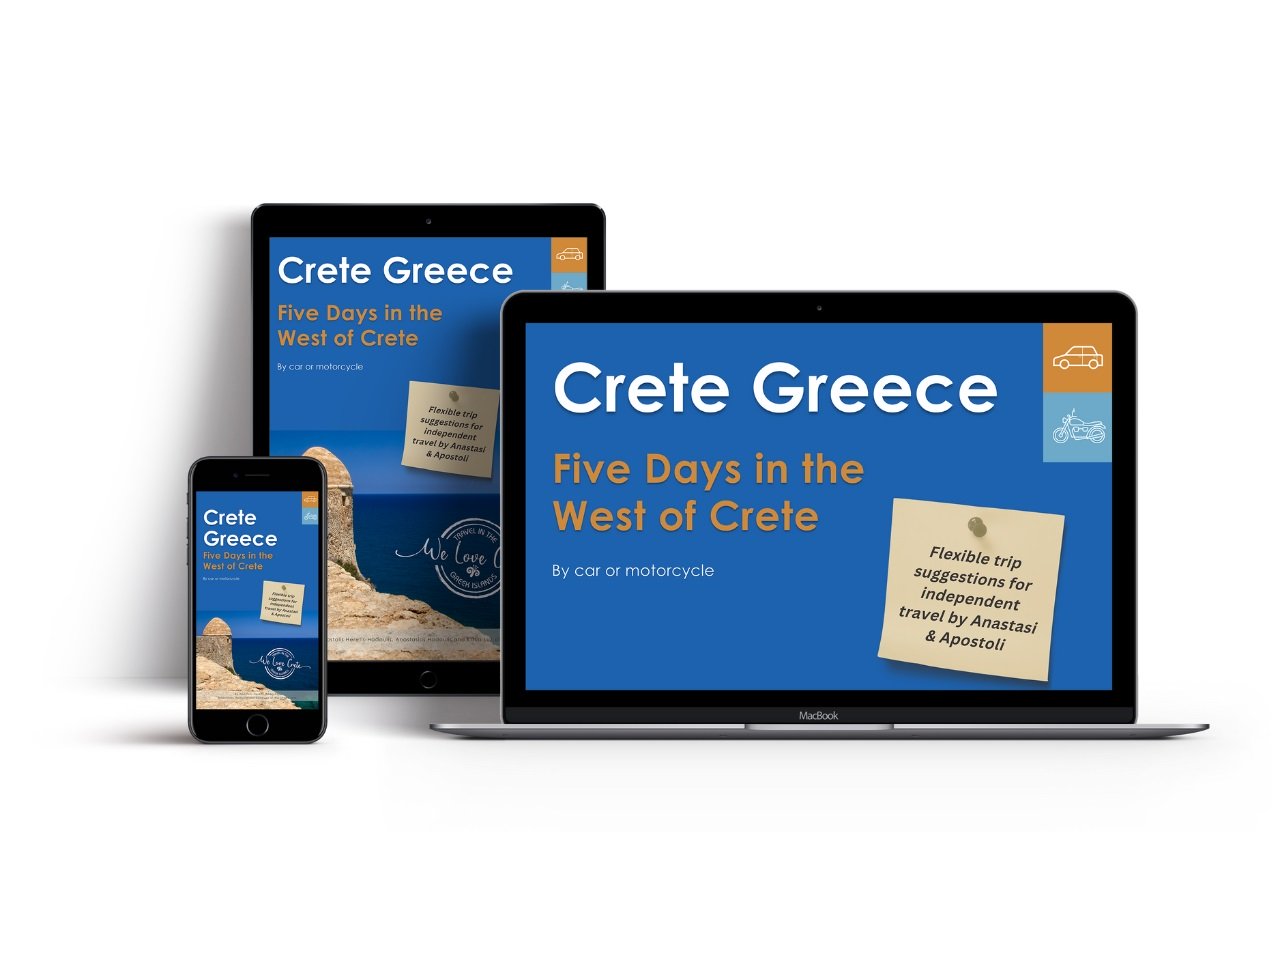 Crete Greece - Trip Ideas - Five Days in the West of Crete by Car or Motorcycle